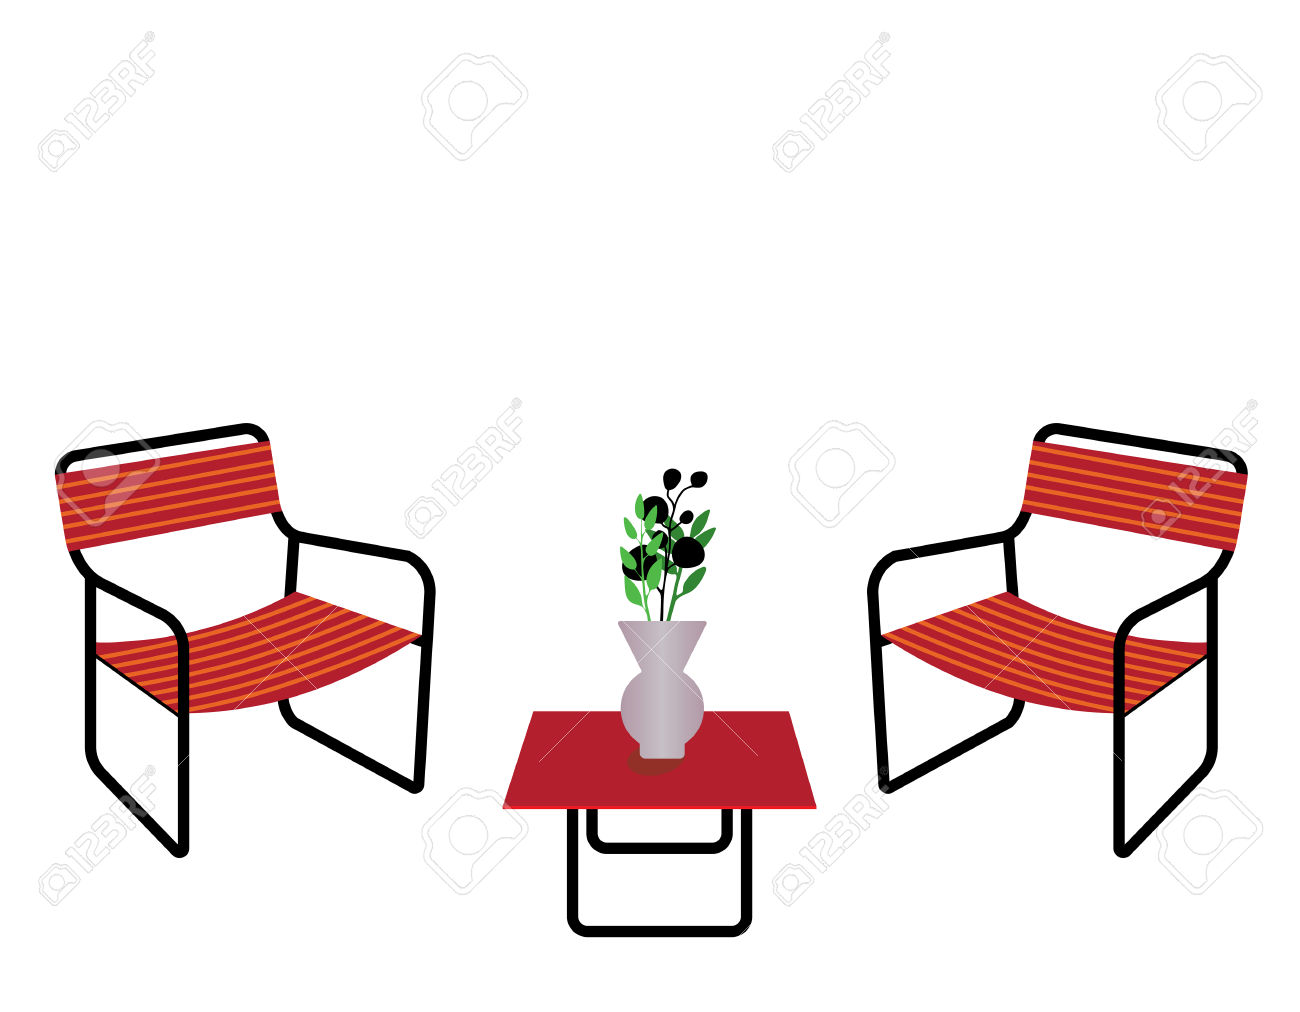 366 Outdoor Seating Stock Illustrations, Cliparts And Royalty Free.